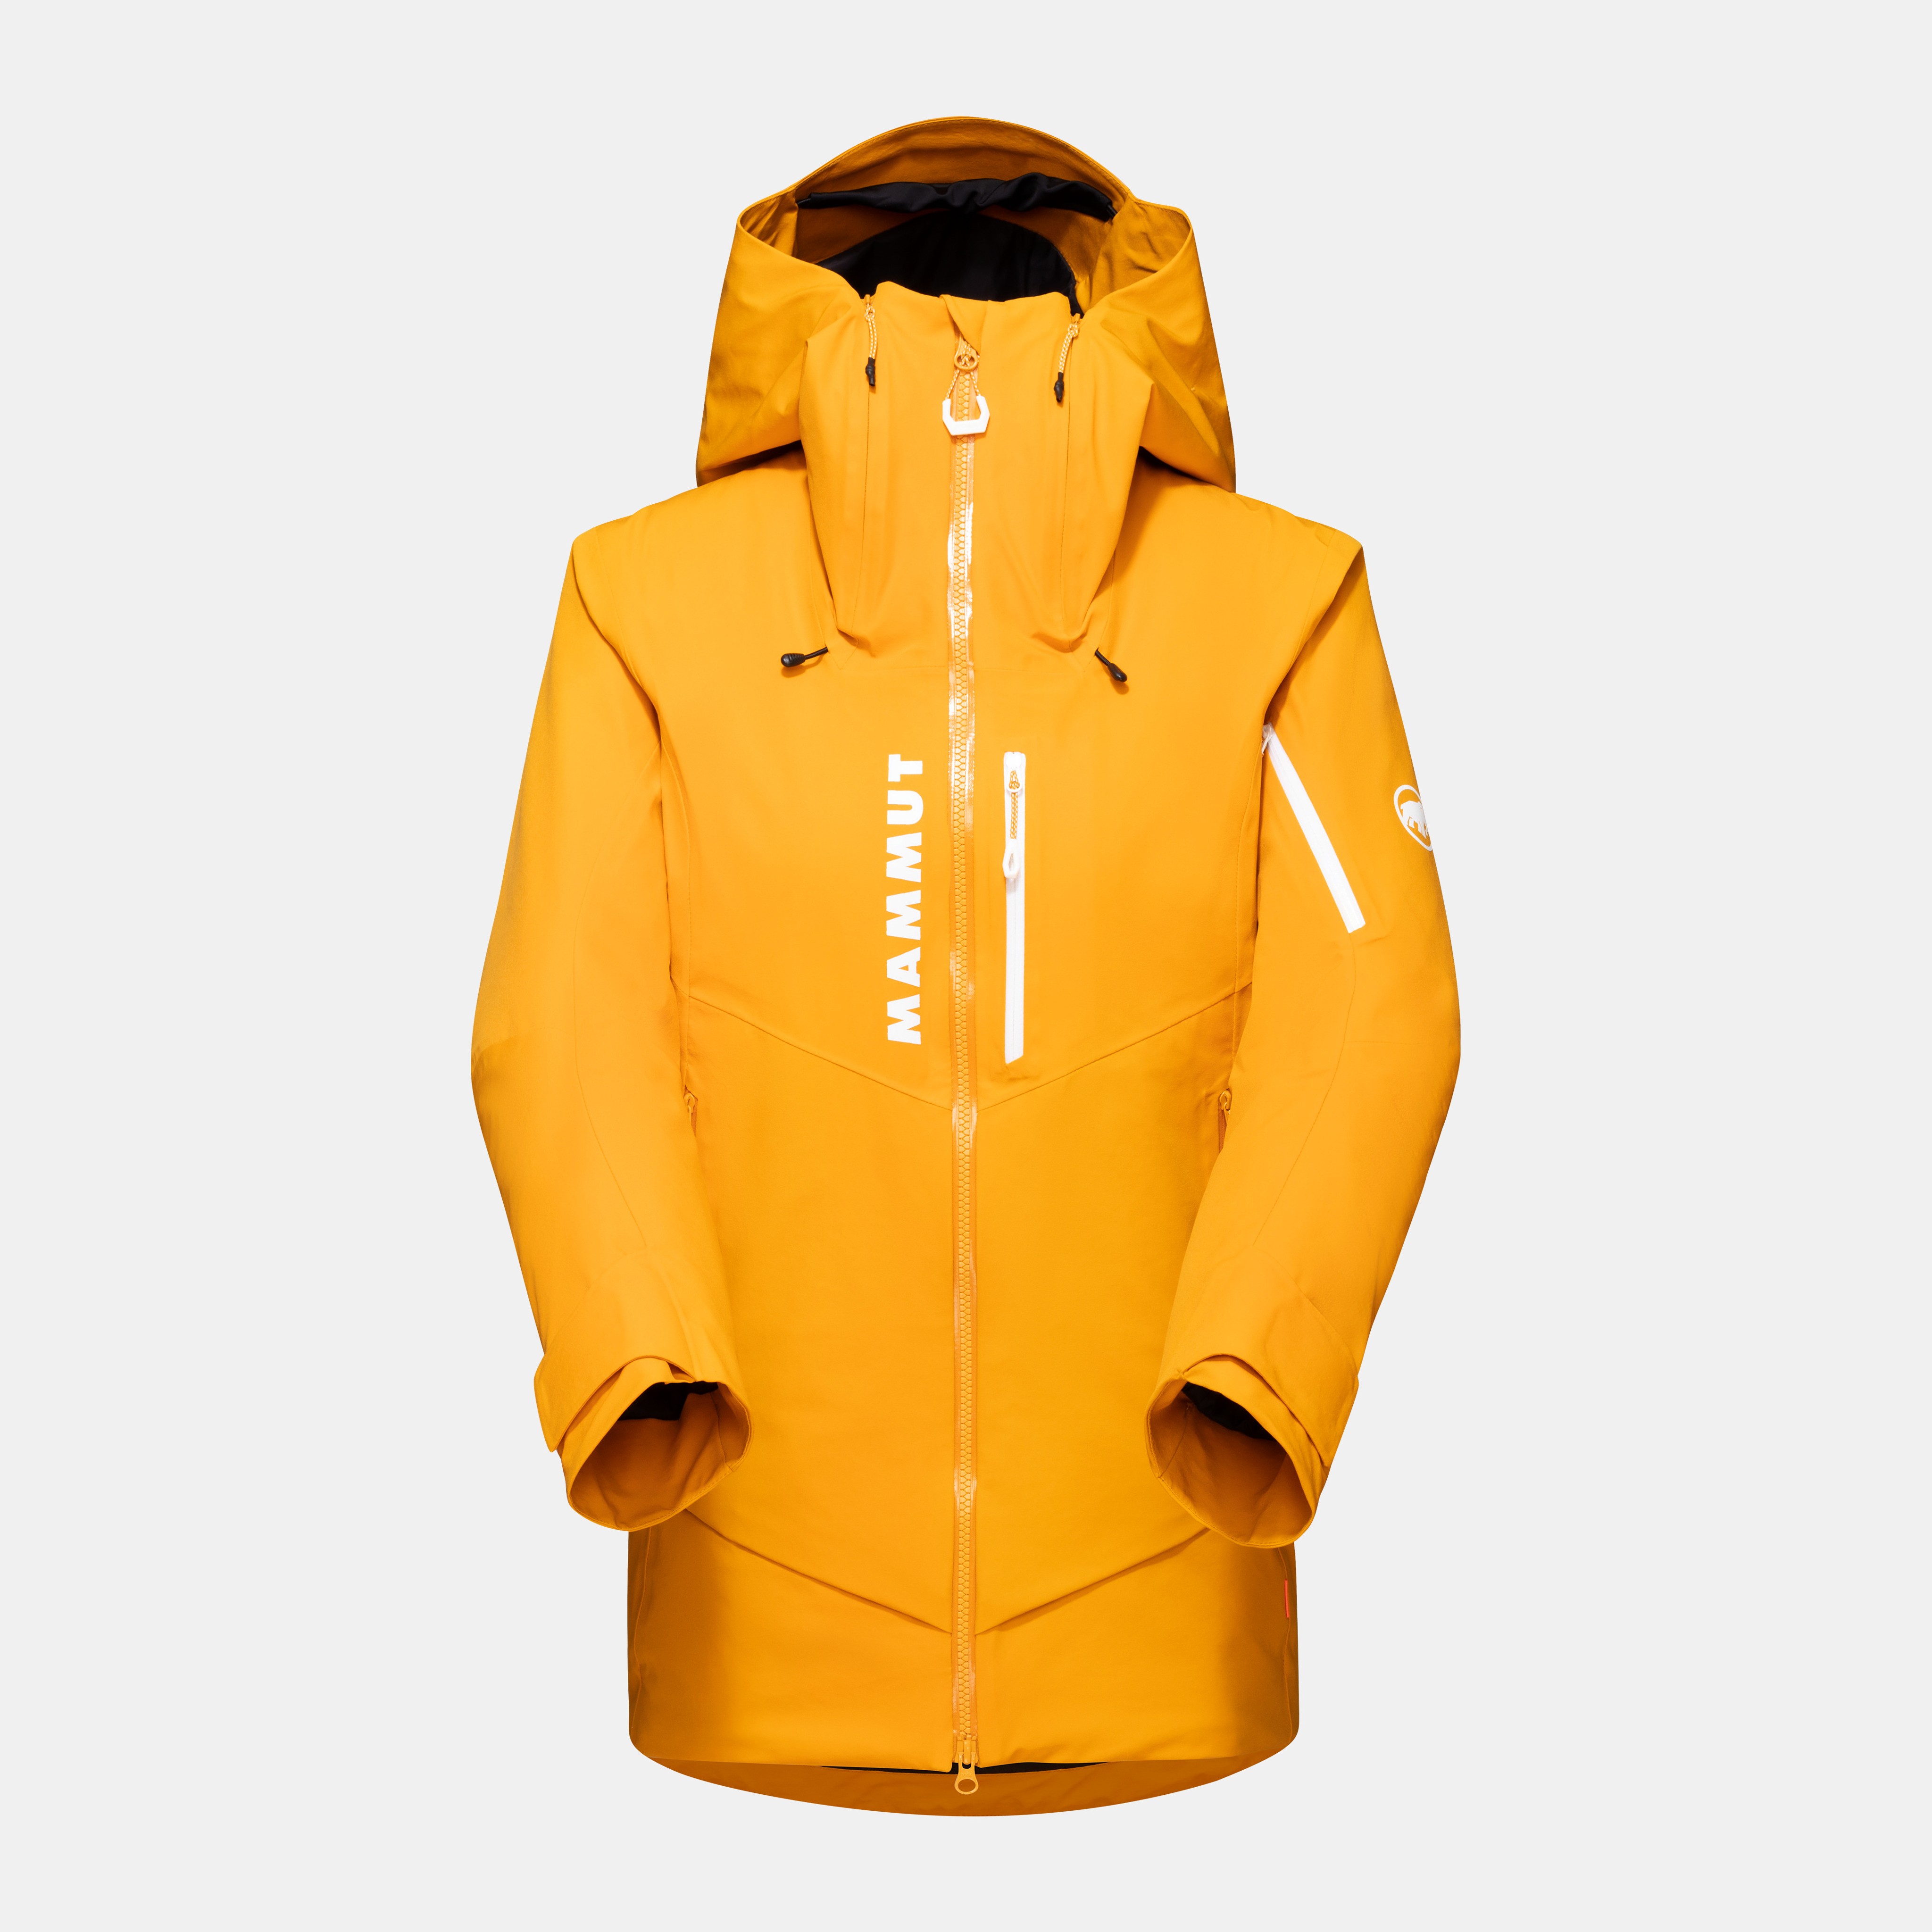 La Liste HS Thermo Hooded Jacket Women product image